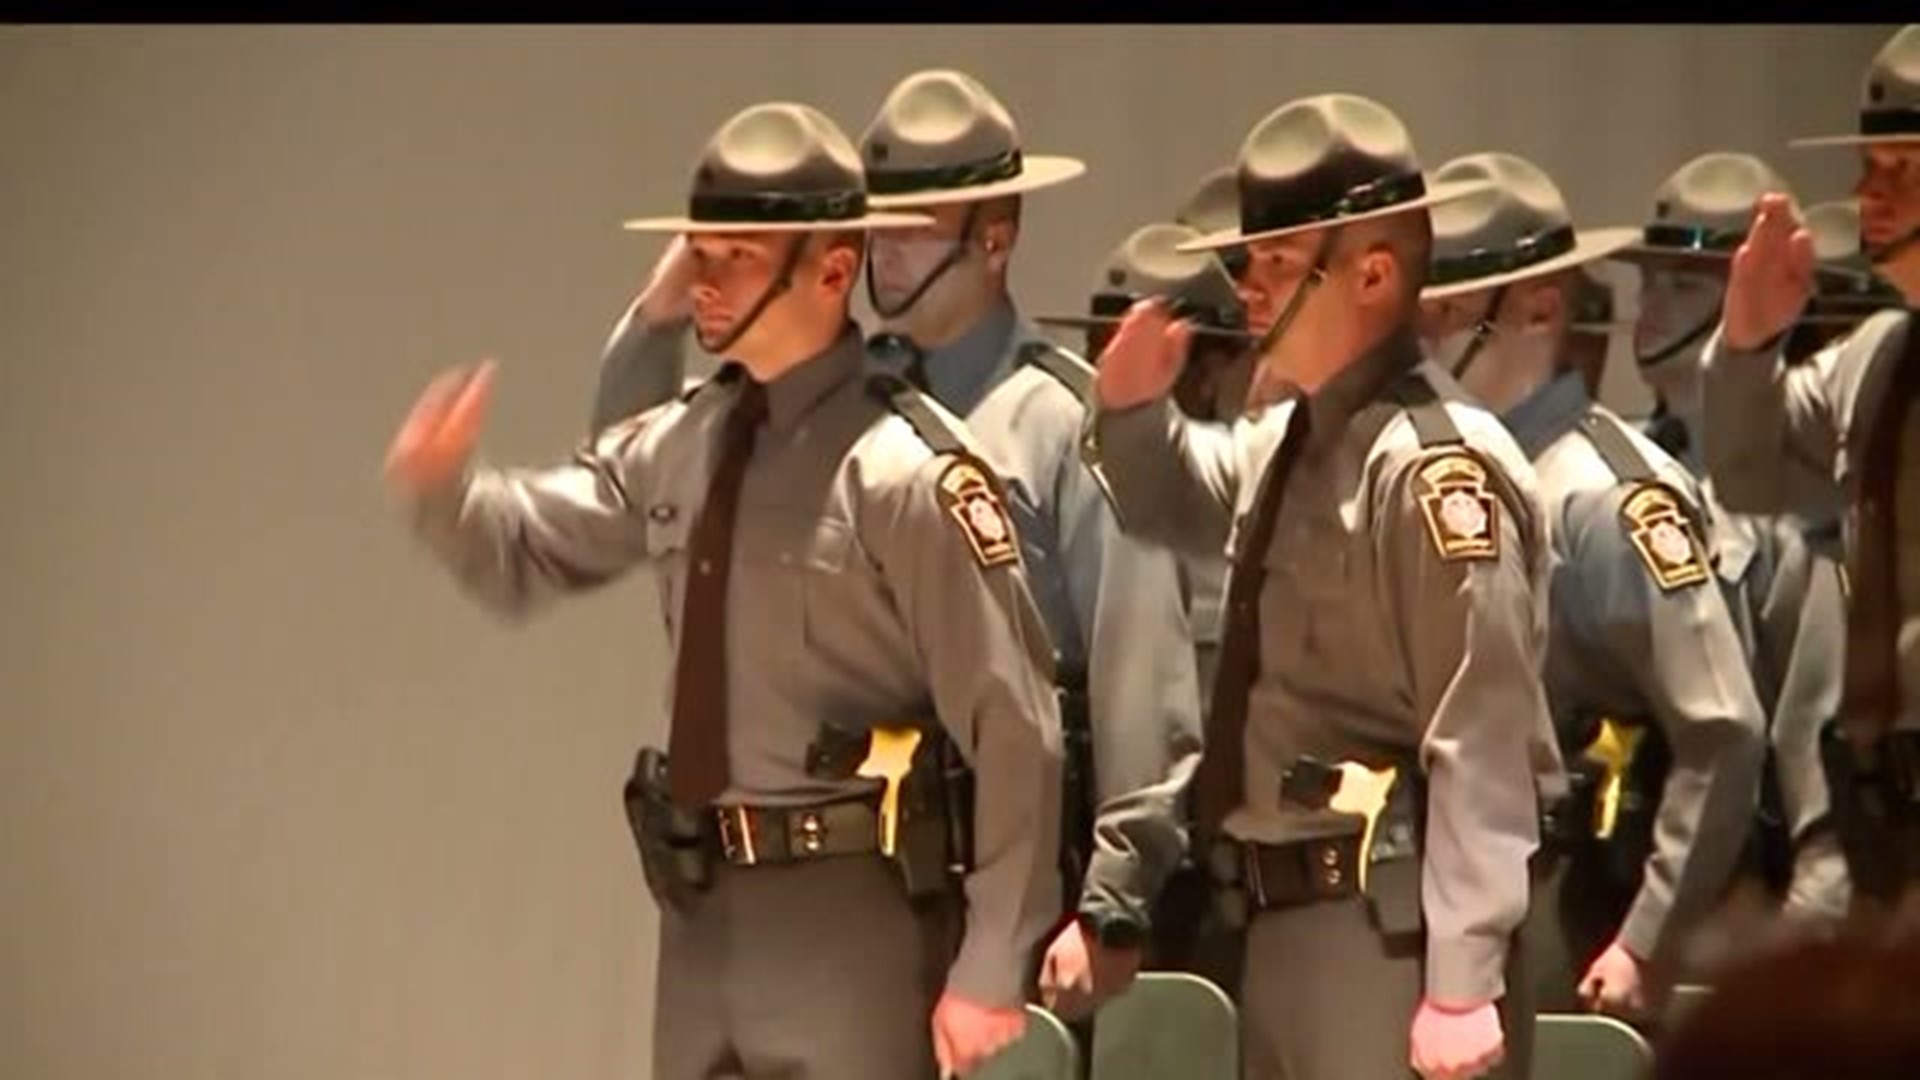 Paying for state police services